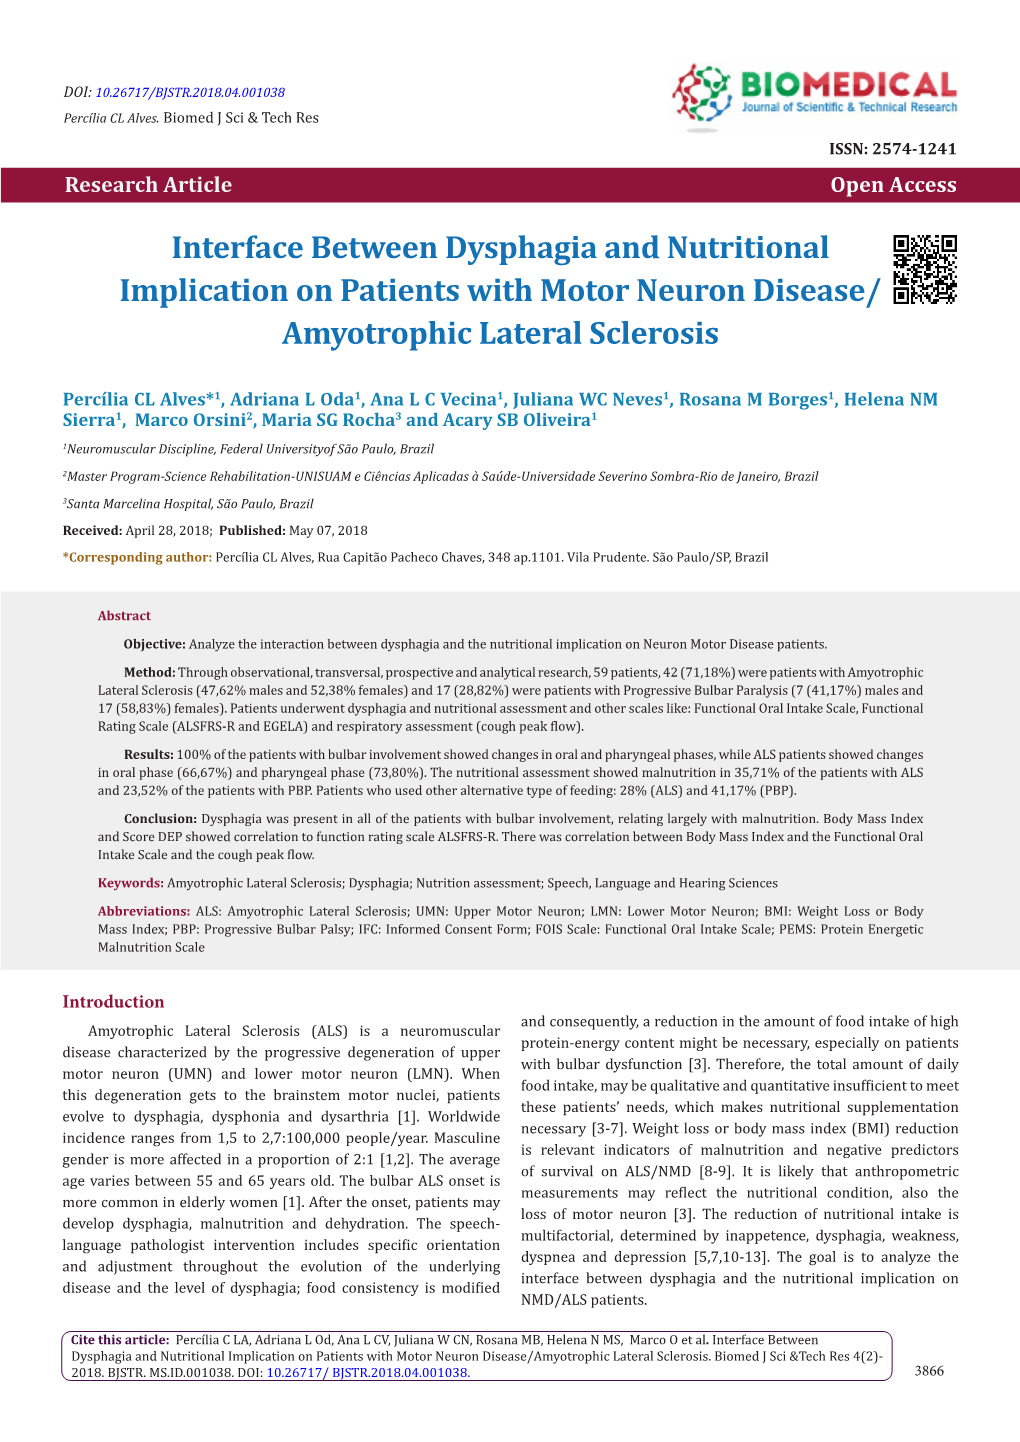 Interface Between Dysphagia and Nutritional Implication on Patients with Motor Neuron Disease/ Amyotrophic Lateral Sclerosis